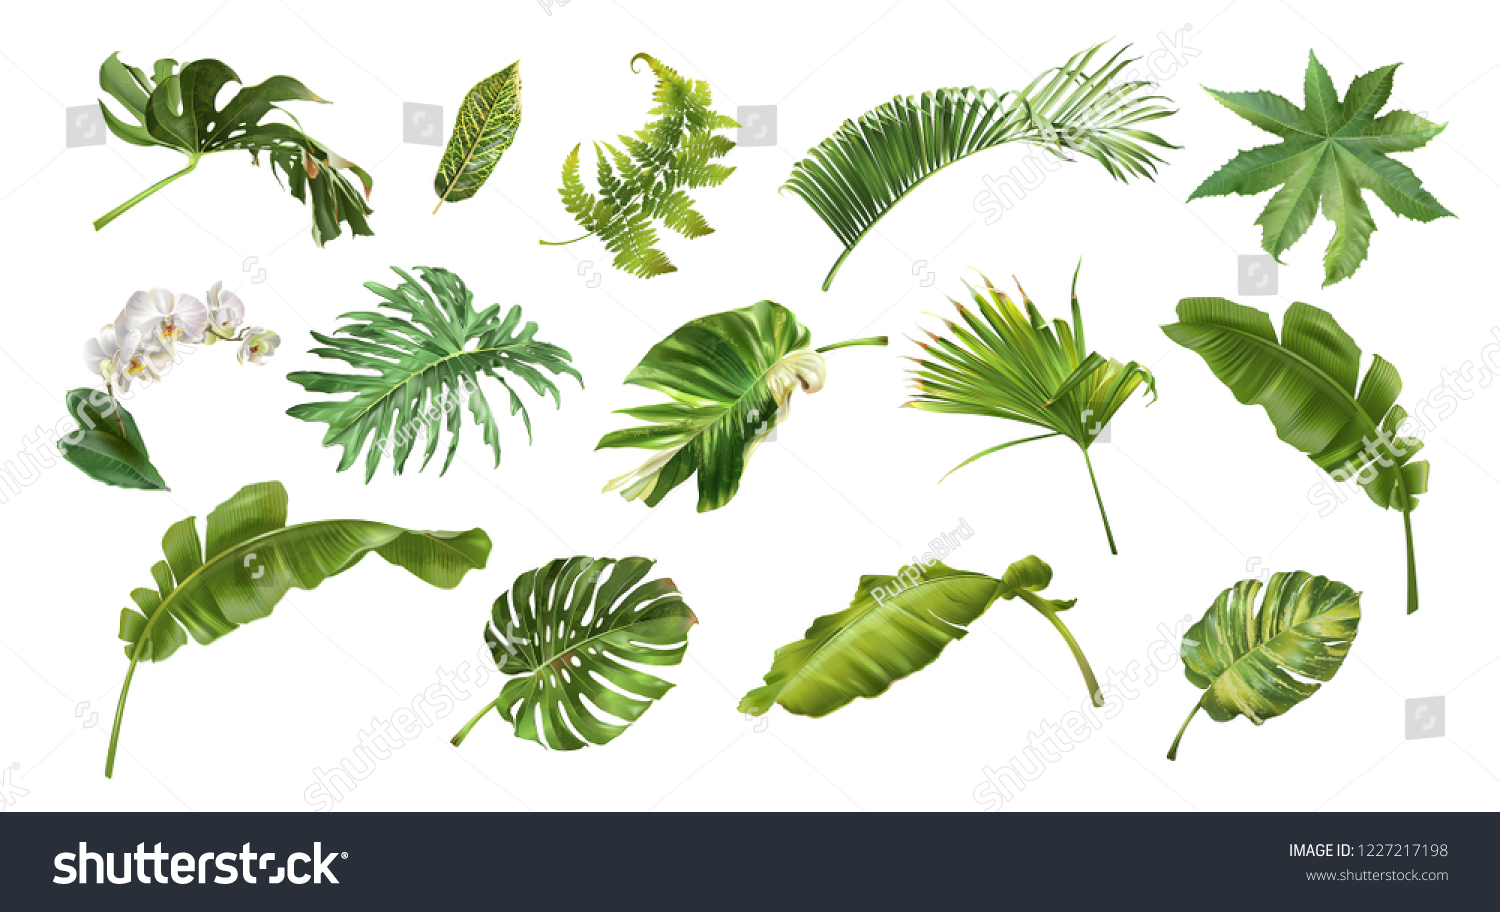 Vector realistic illustration set of tropical leaves and flowers isolated on white background. Highly detailed colorful plant collection. Botanical elements for cosmetics, spa, beauty care products #1227217198